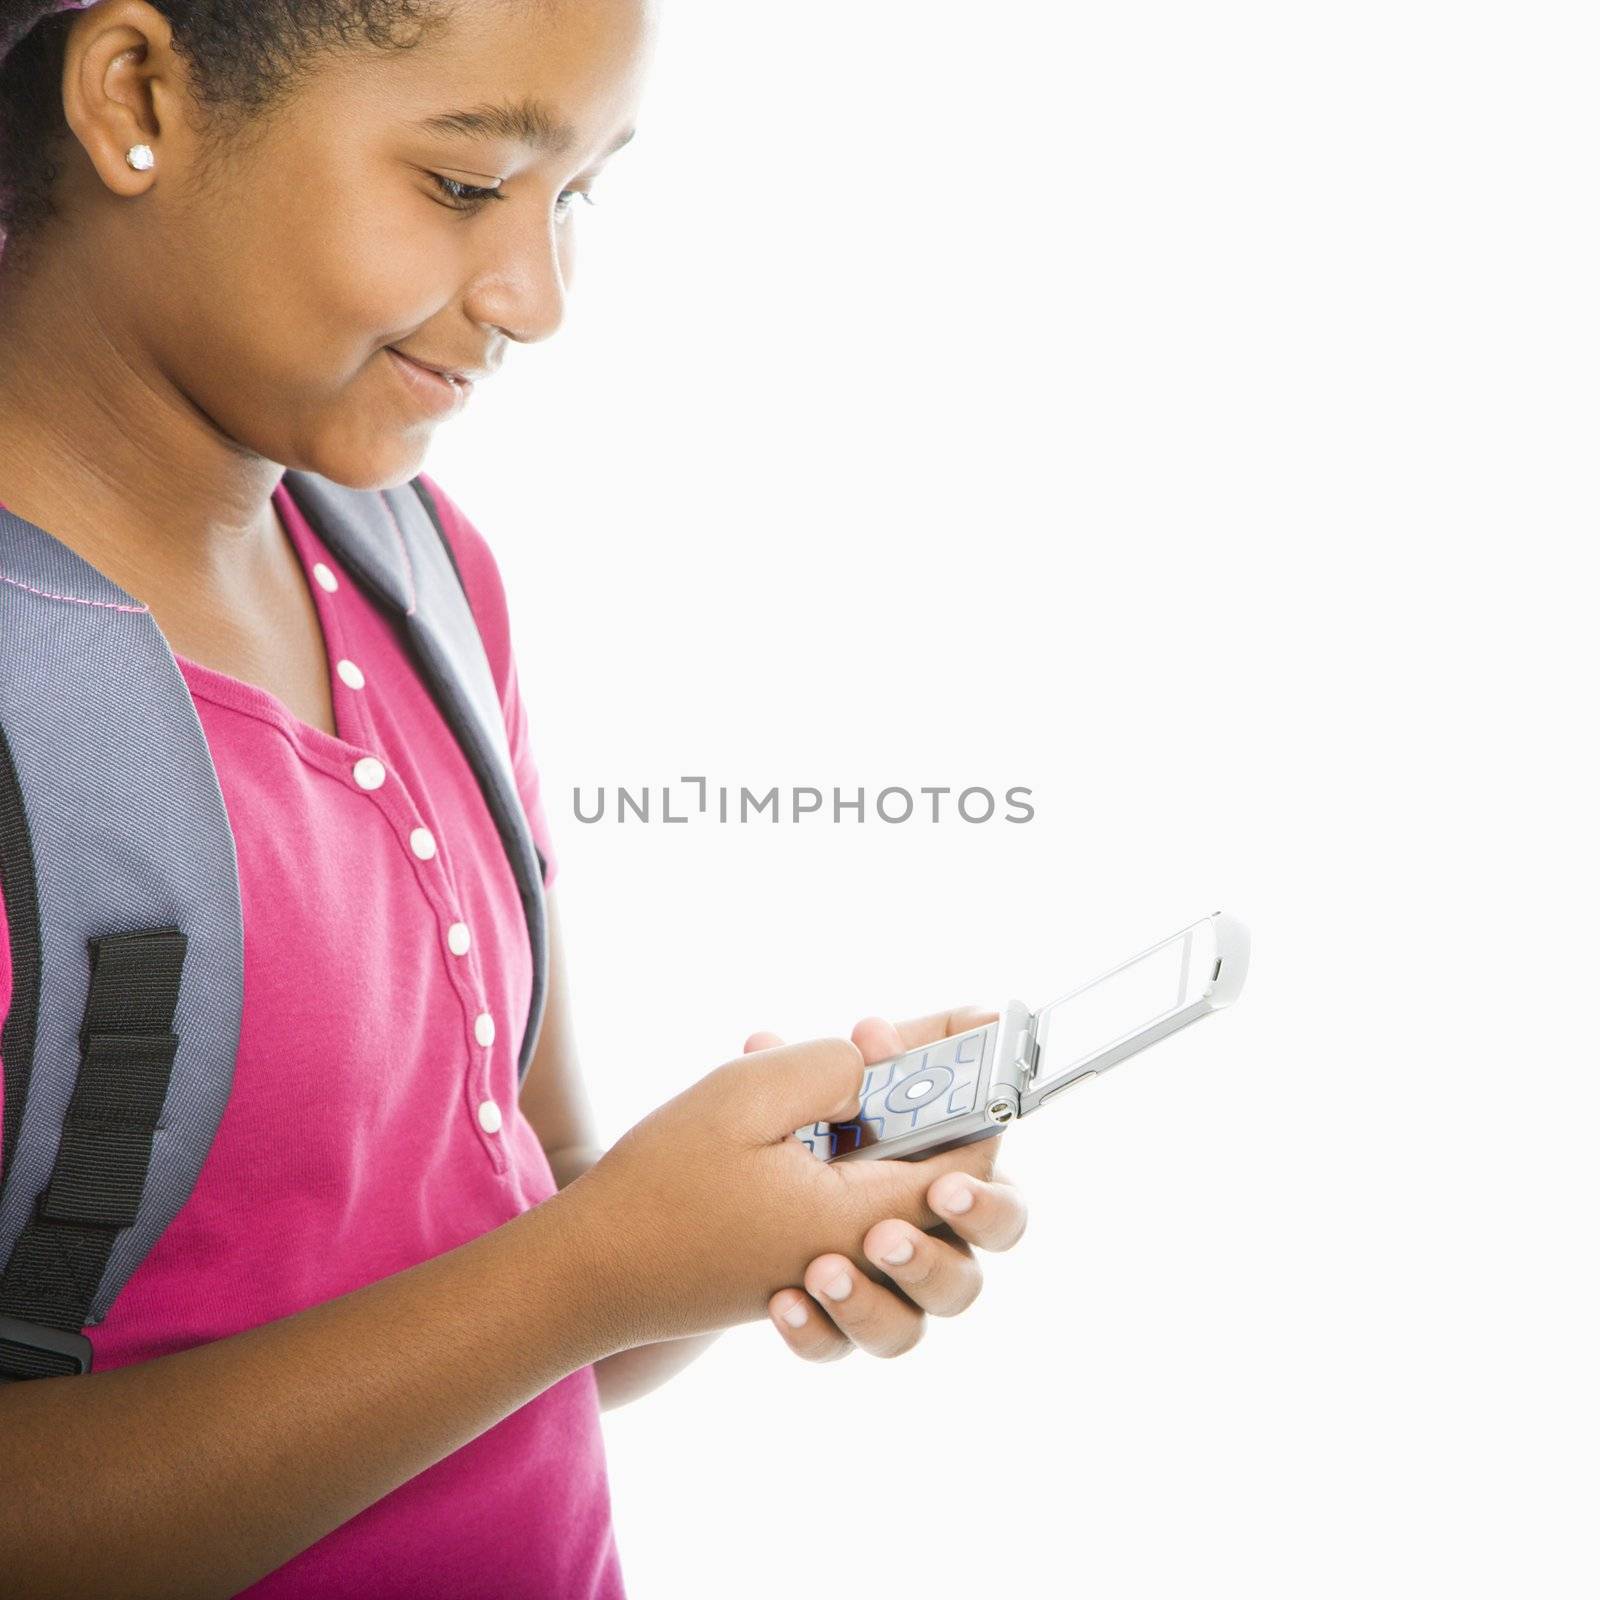 African American girl with backpack text messaging on cell phone.